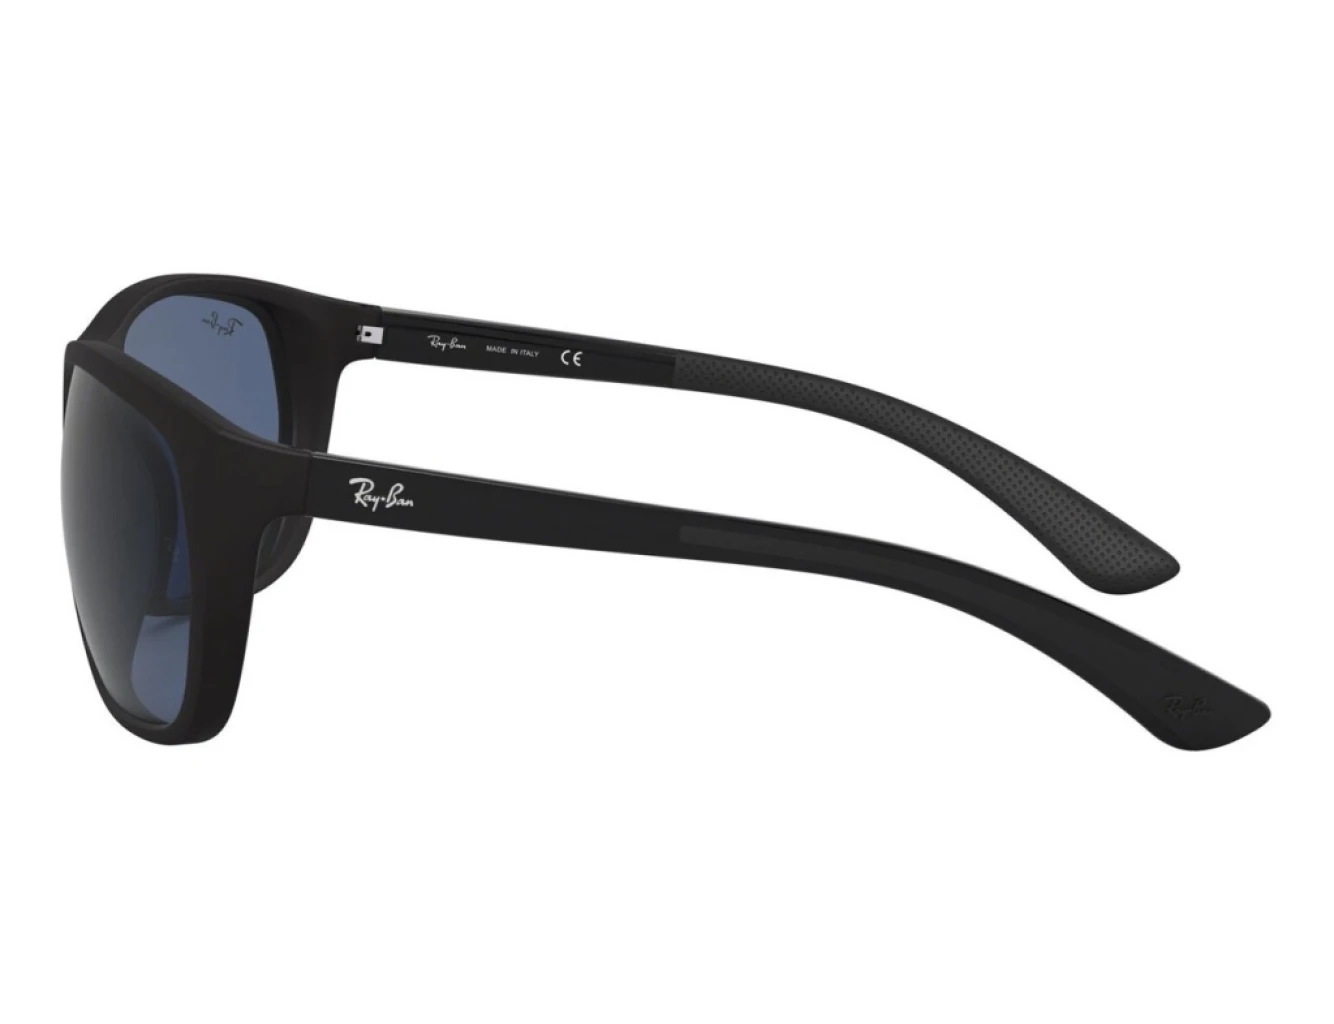 Ray-Ban RB4307-601S/80(61)